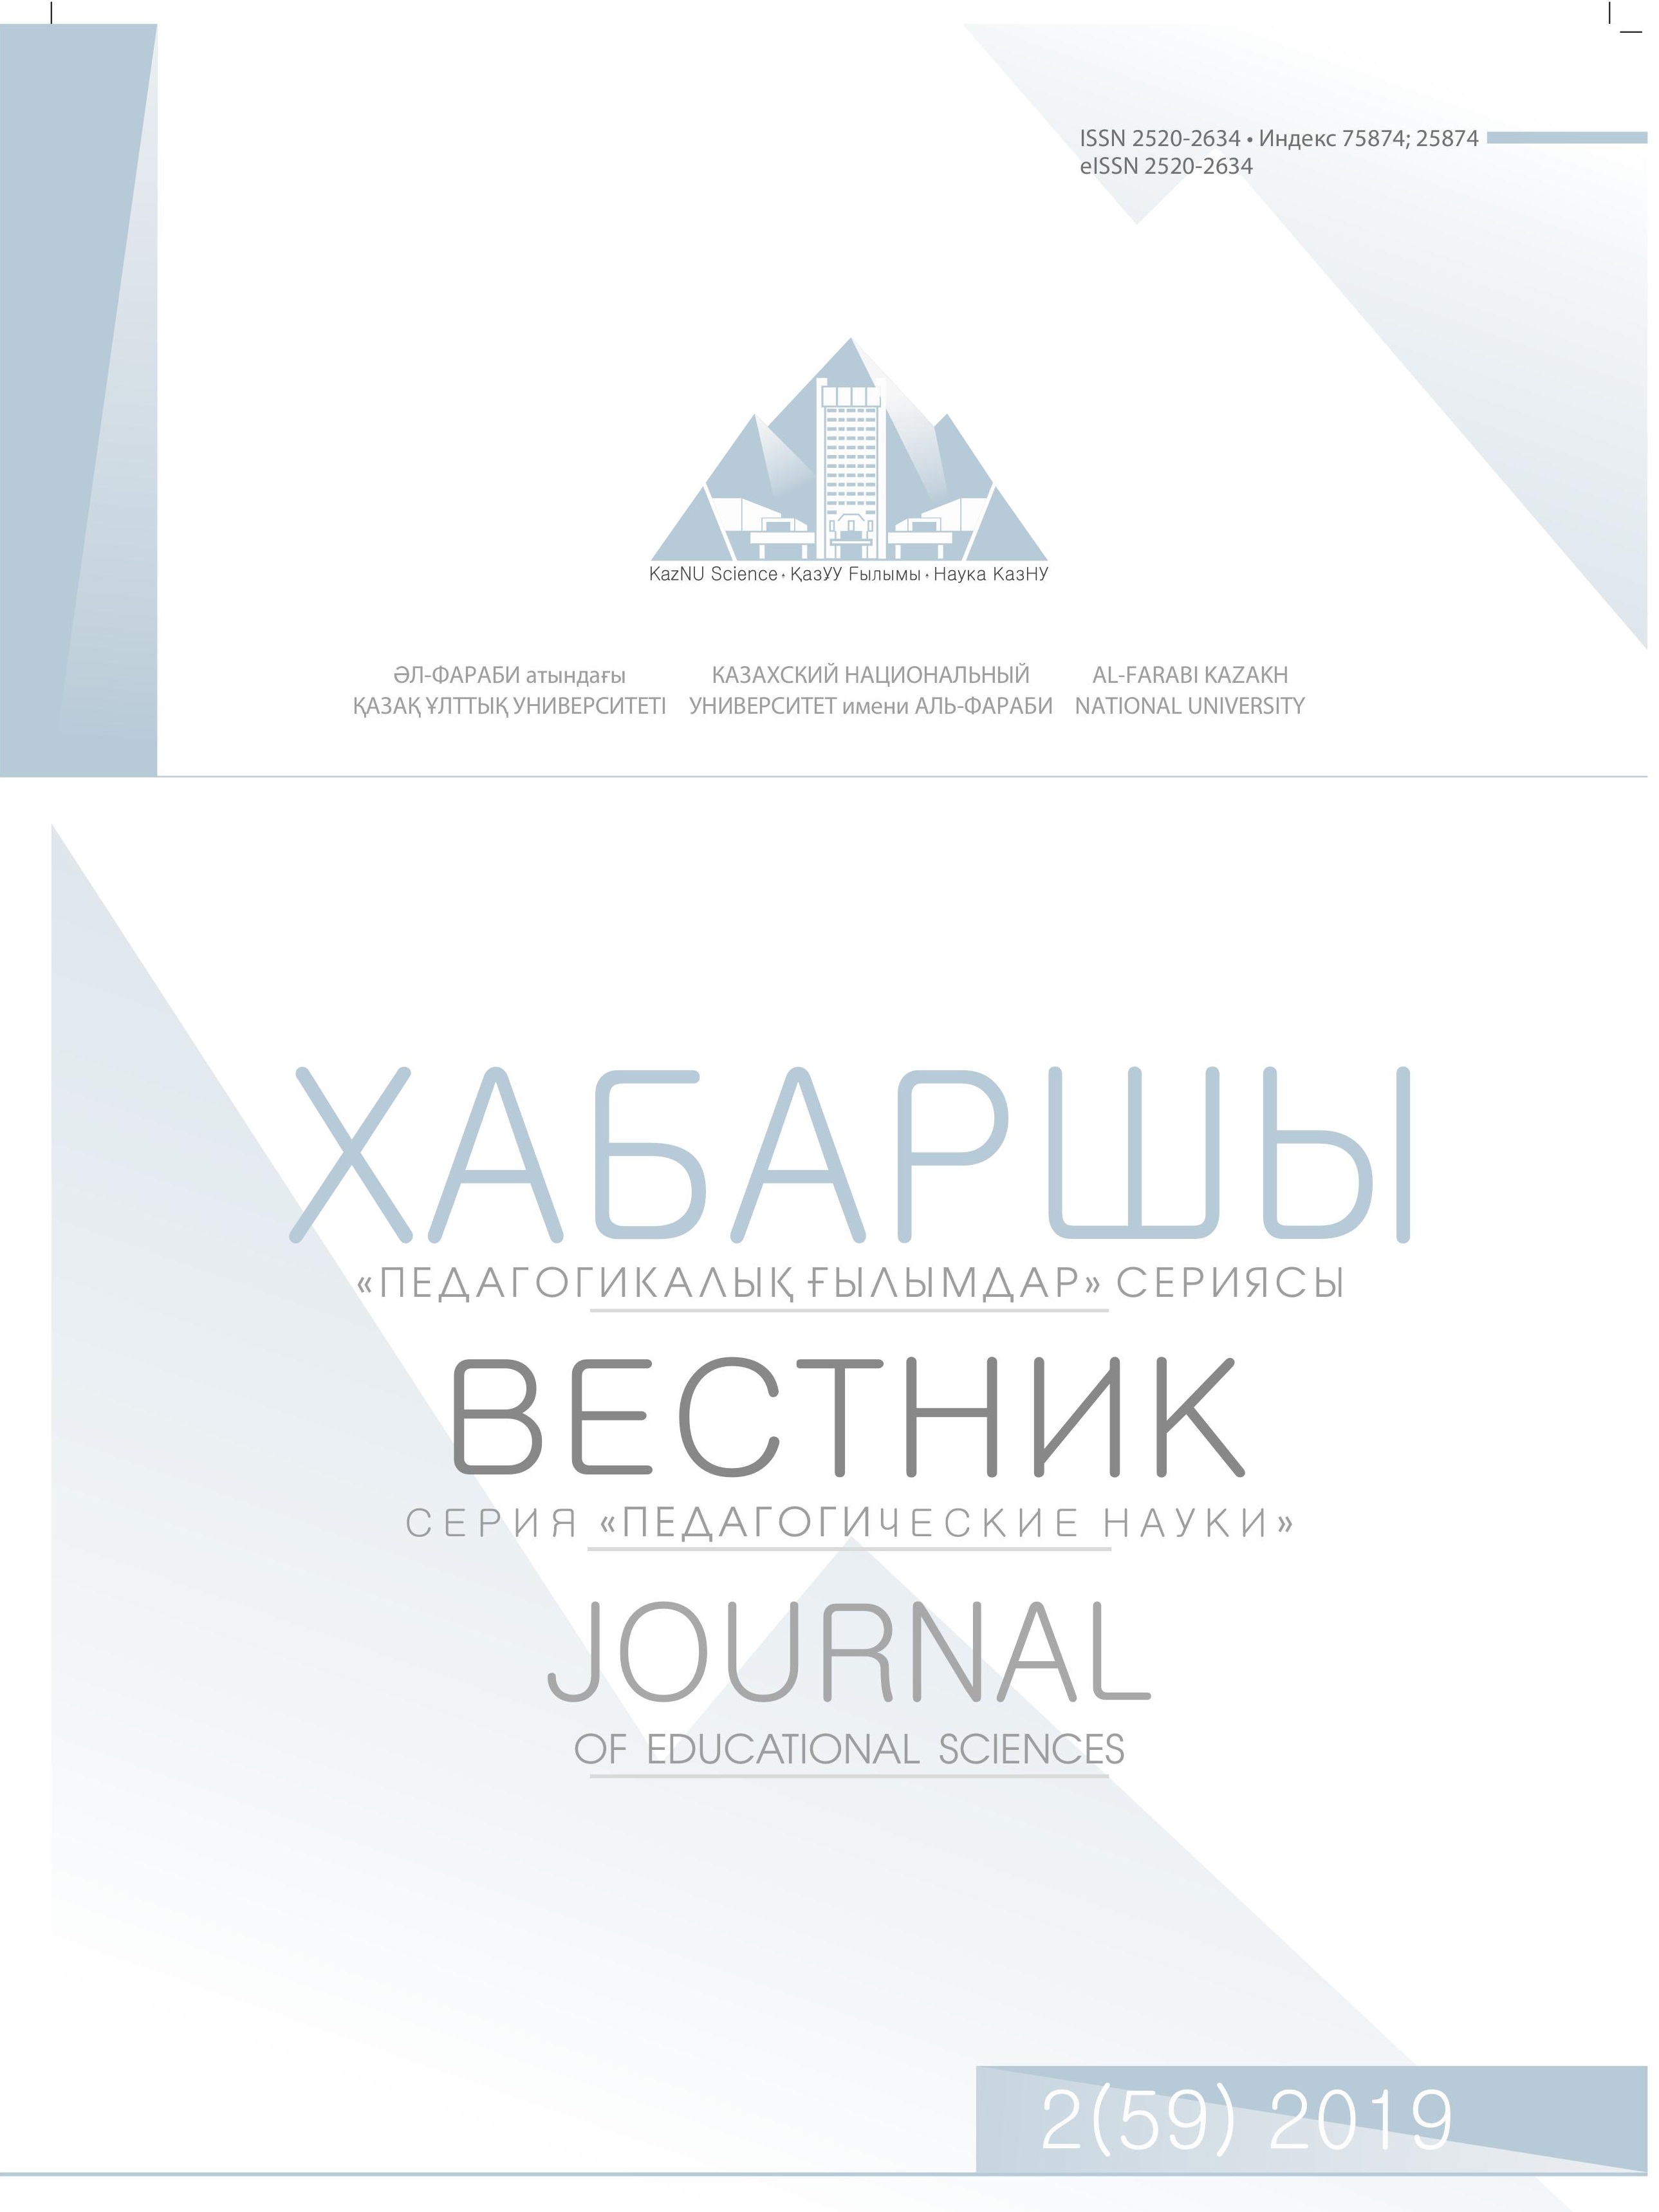 					View Vol. 59 No. 2 (2019): Journal of educational sciences
				